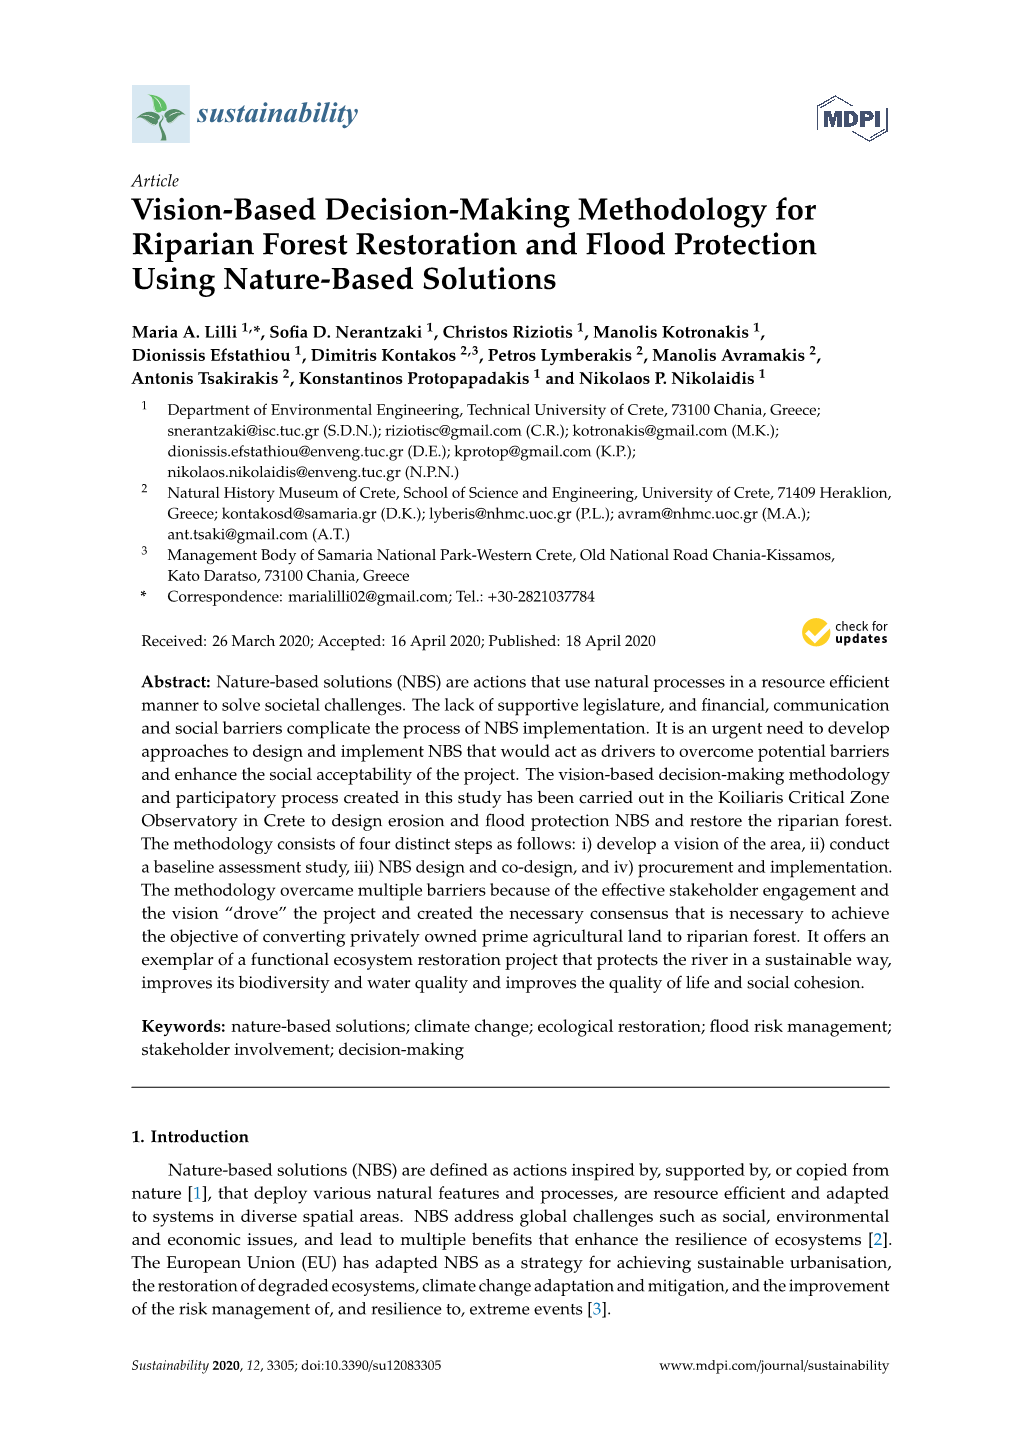 Vision-Based Decision-Making Methodology for Riparian Forest Restoration and Flood Protection Using Nature-Based Solutions